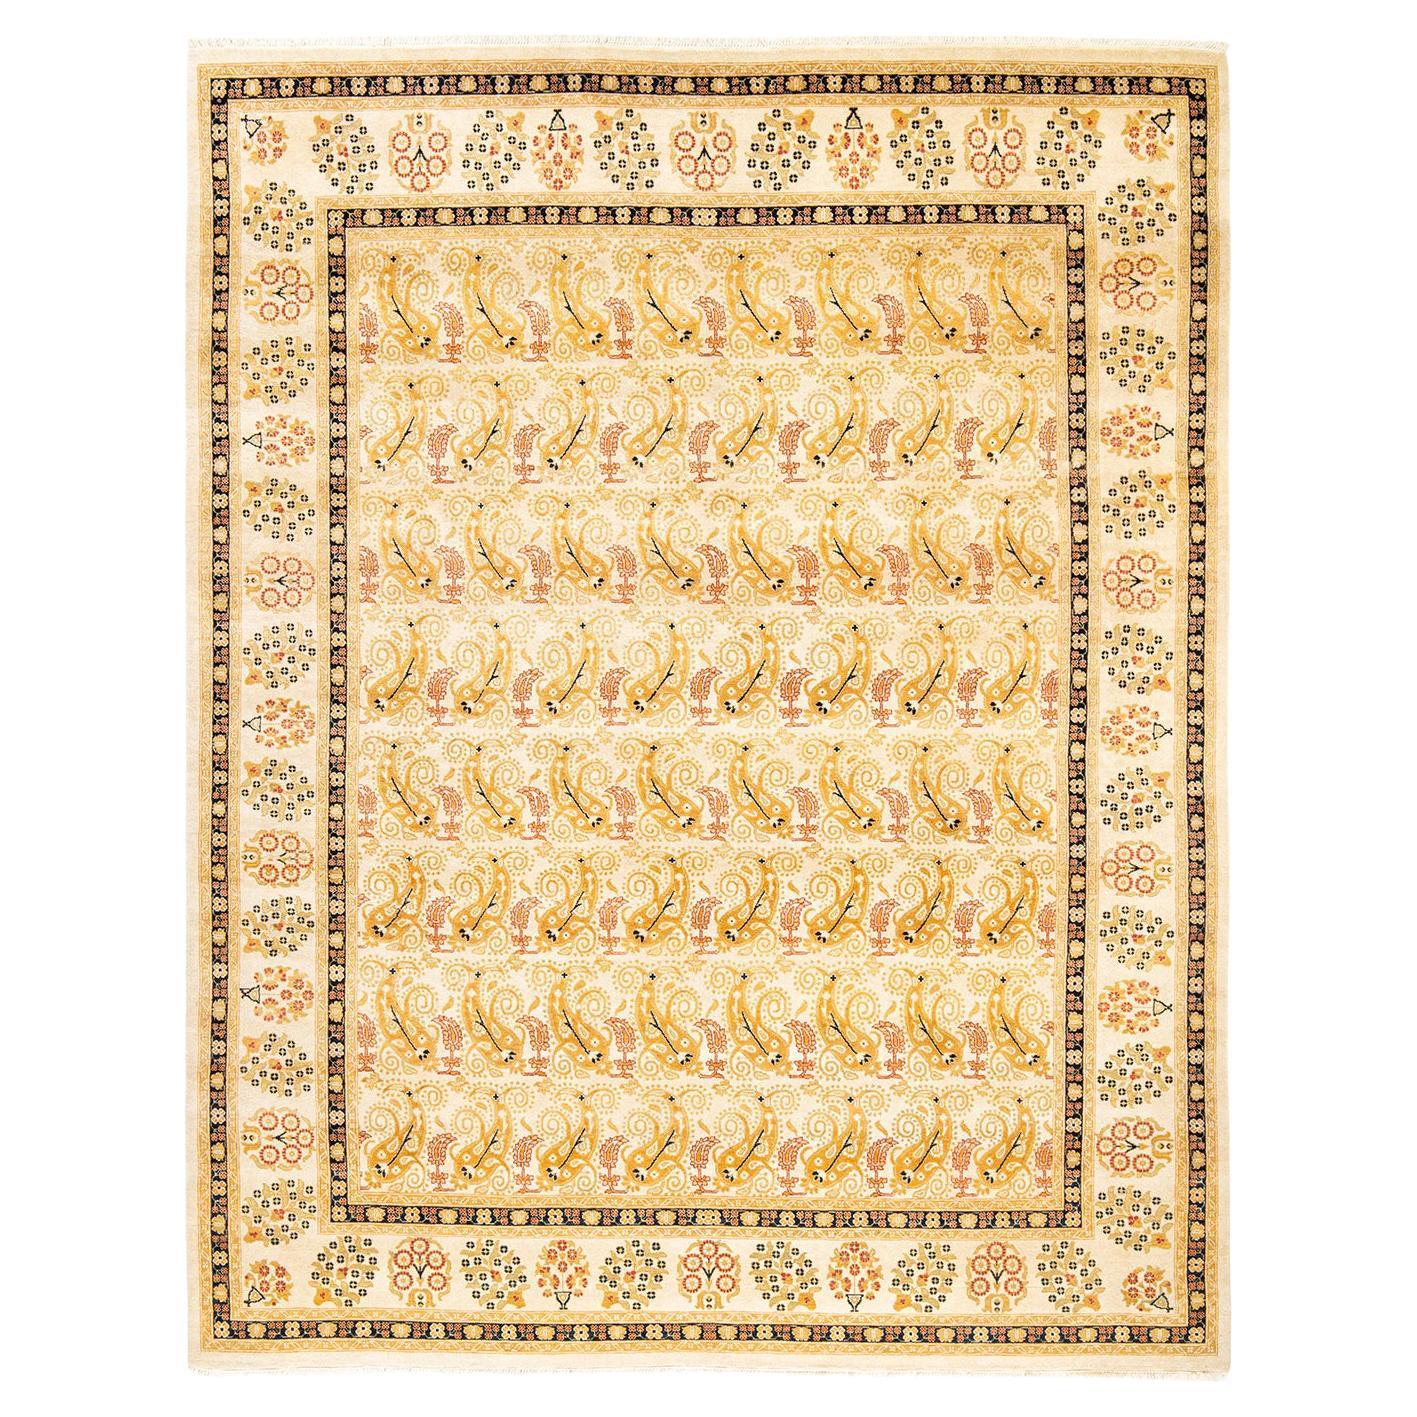 One-of-a-kind Hand Made Contemporary Eclectic Ivory Area Rug